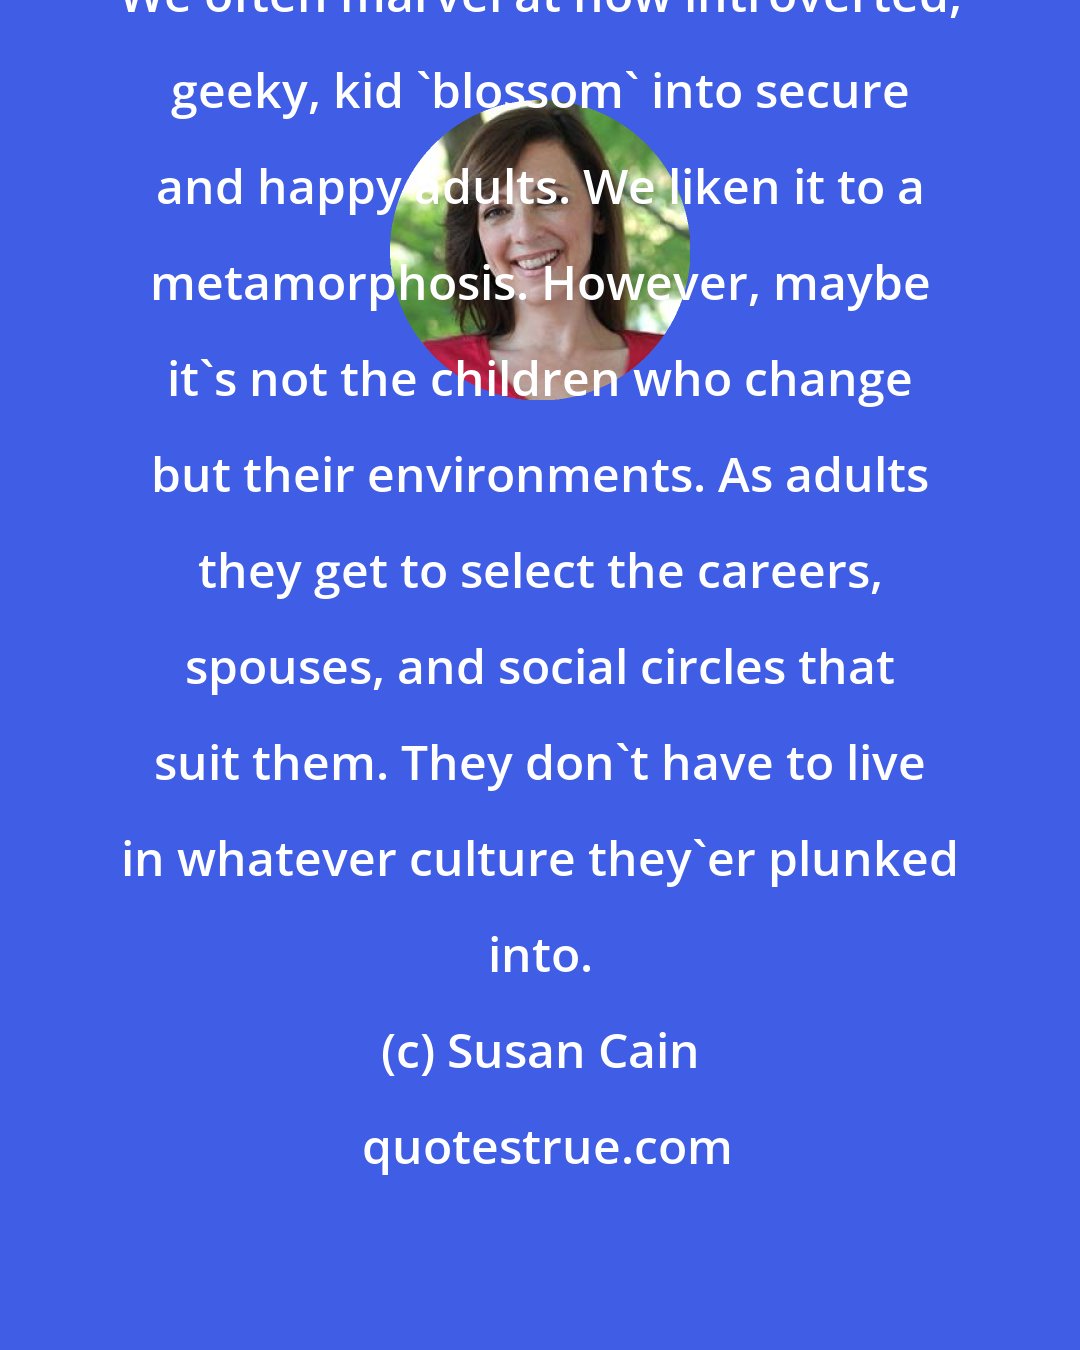 Susan Cain: We often marvel at how introverted, geeky, kid 'blossom' into secure and happy adults. We liken it to a metamorphosis. However, maybe it's not the children who change but their environments. As adults they get to select the careers, spouses, and social circles that suit them. They don't have to live in whatever culture they'er plunked into.